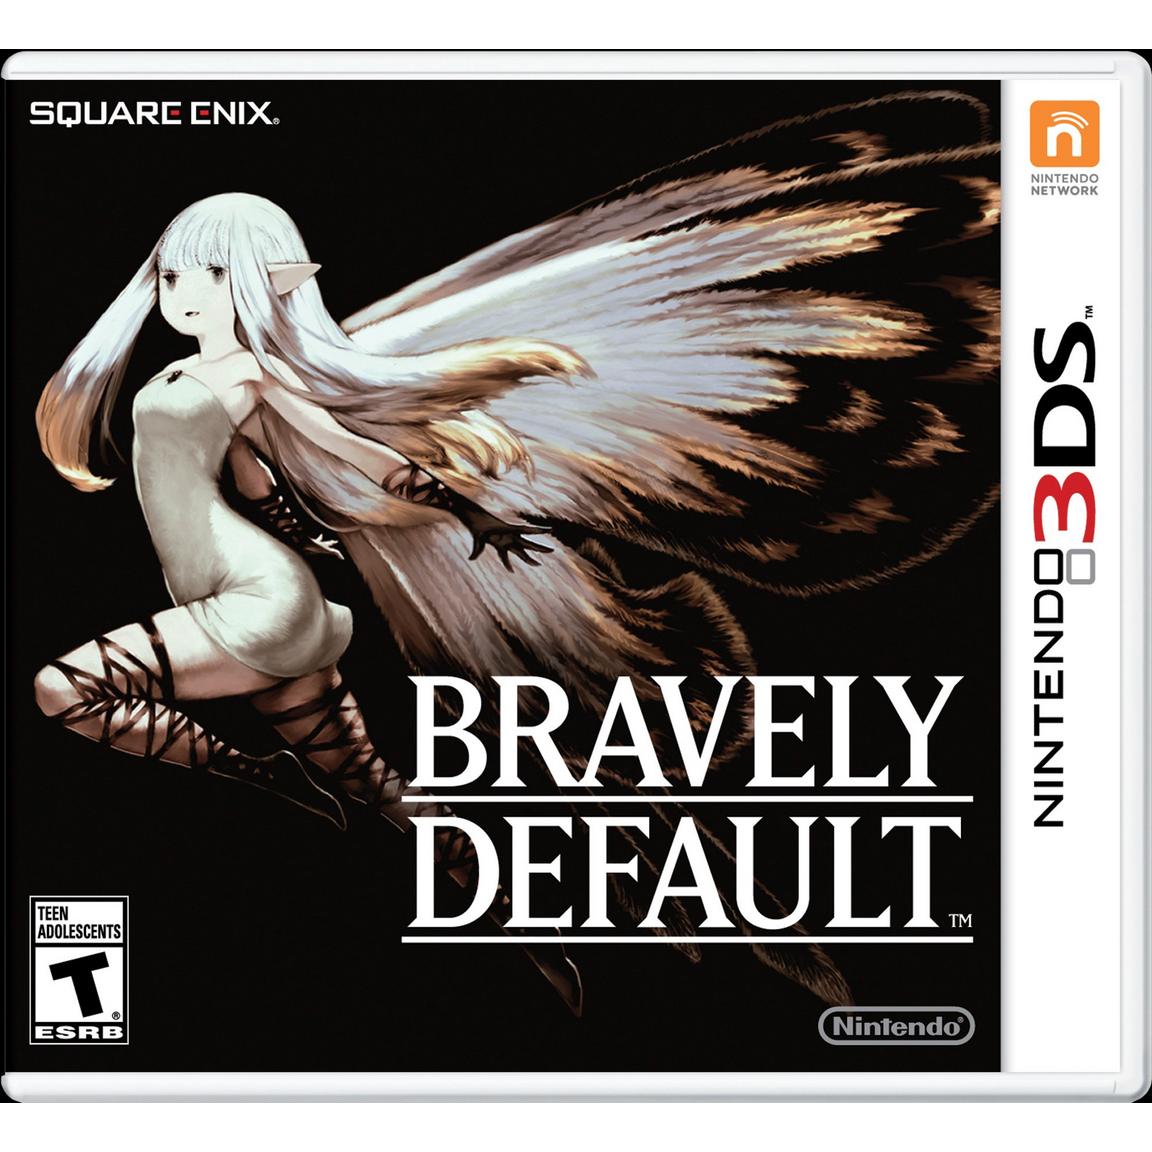 Bravely Default - Nintendo 3DS, Pre-Owned